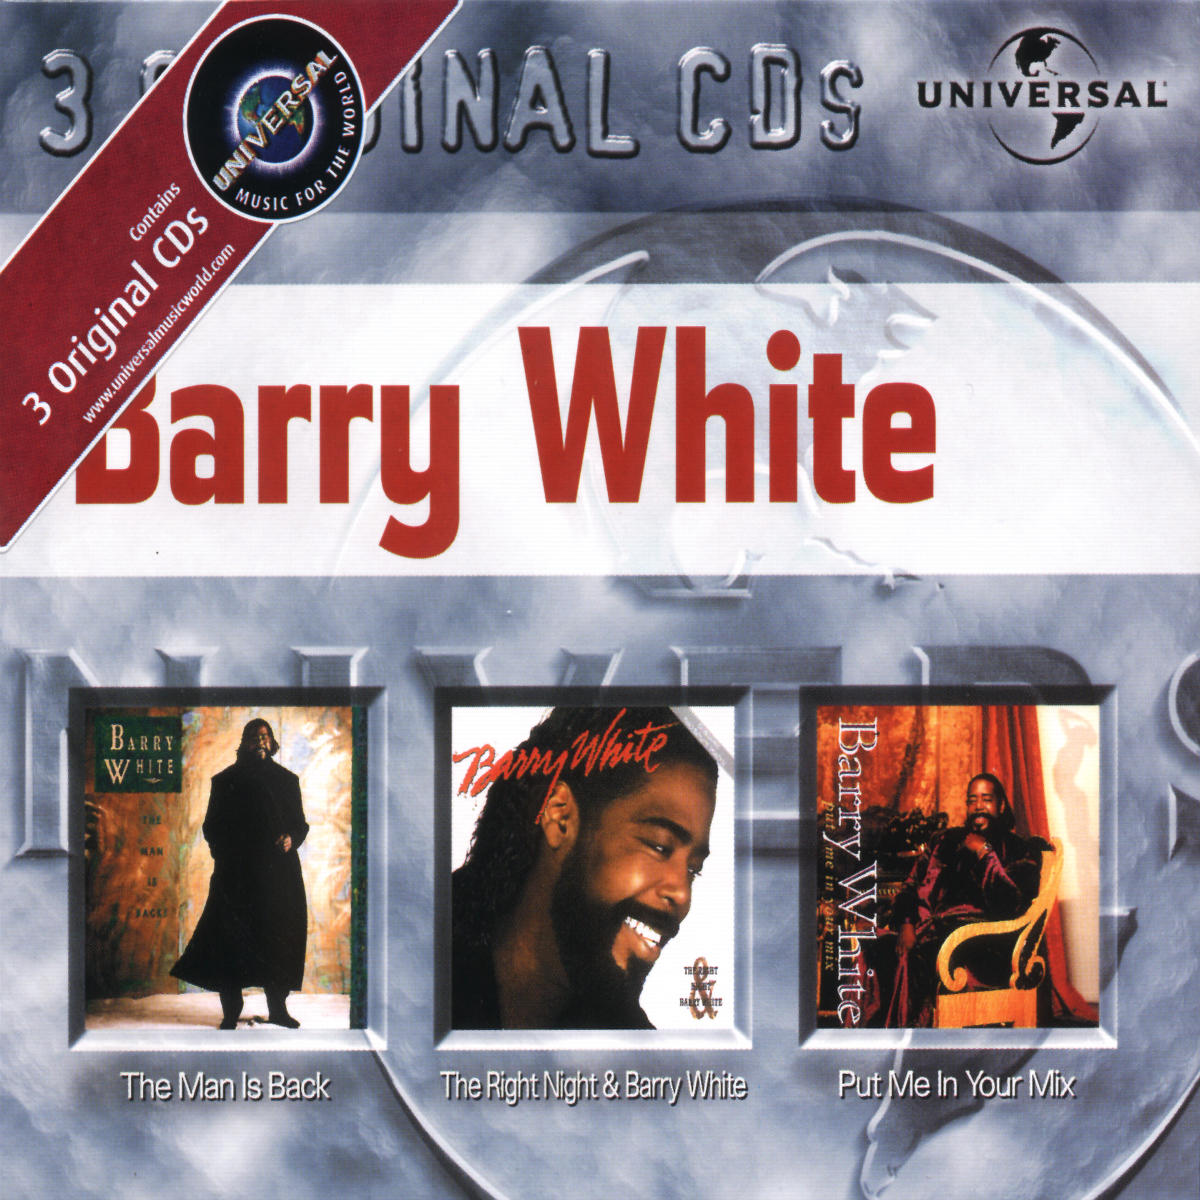 Barry White the Ultimate collection. Barry White the man is back. Barry White - 1987 - the right Night & Barry White. Barry White - 1991 - put me in your Mix. Песню бари вайт